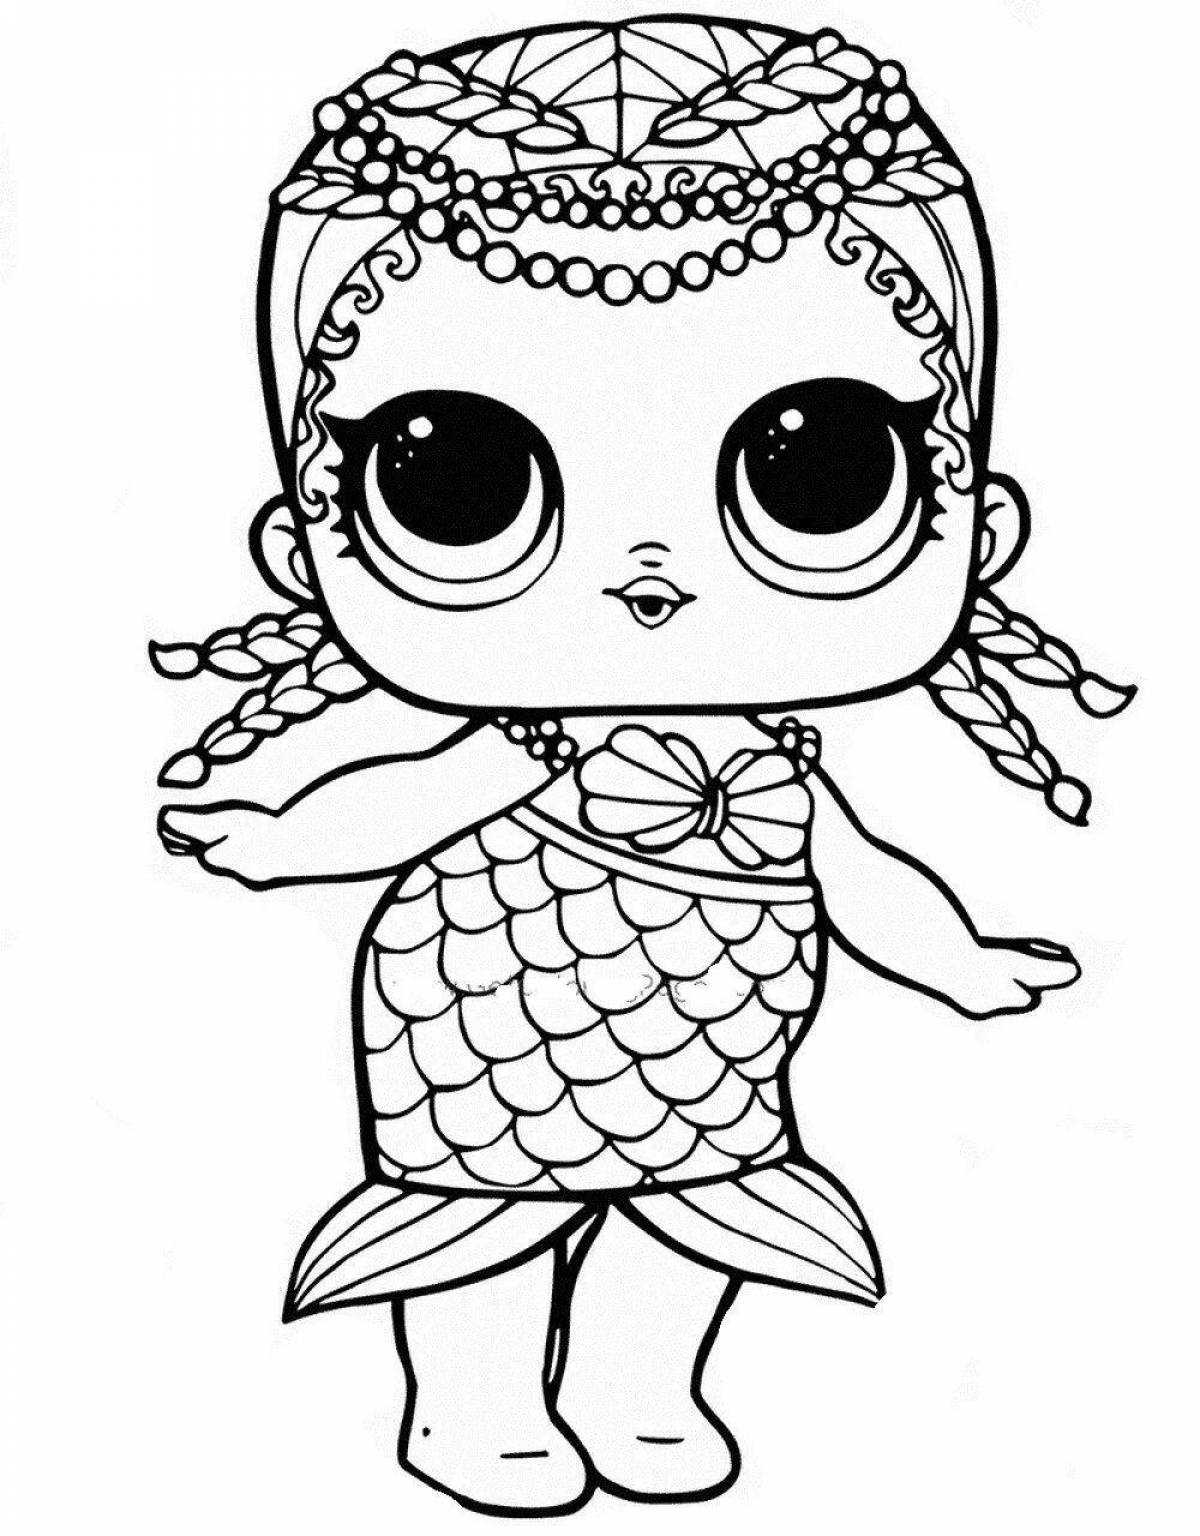 Fairytale lol doll coloring book for kids